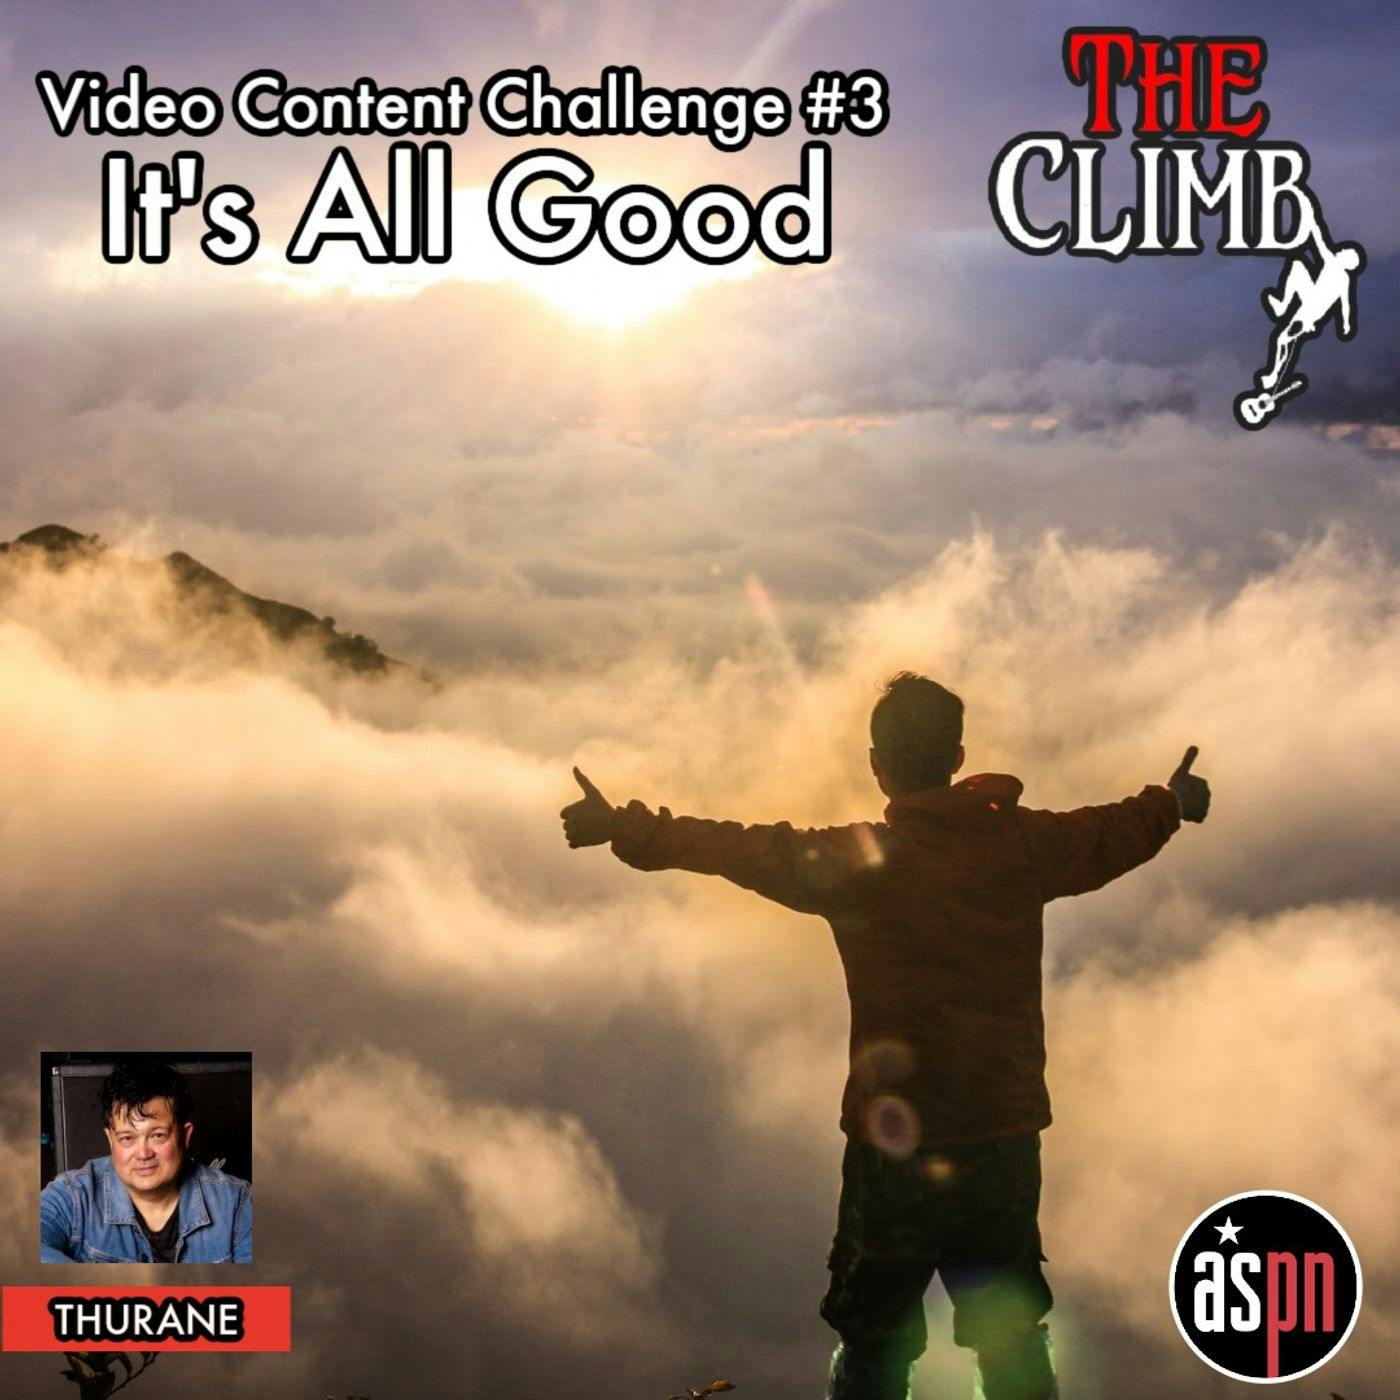 Video Content Challenge #3: It's All Good